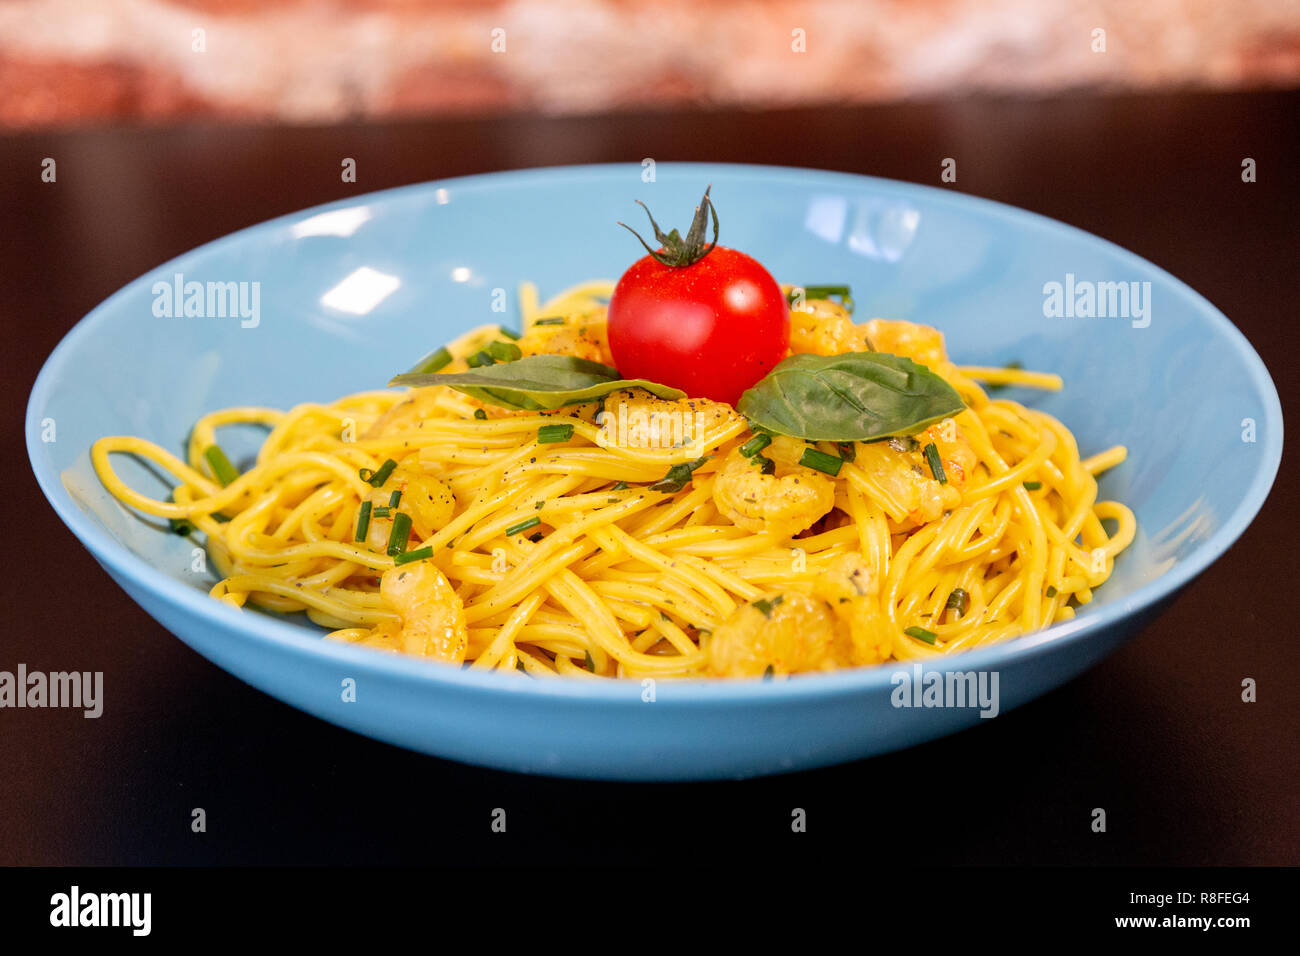 Close up of yellow spaghetti with prawns, a cherry tomato and basil in a blue plate on a black table. With a brick wall. Stock Photo